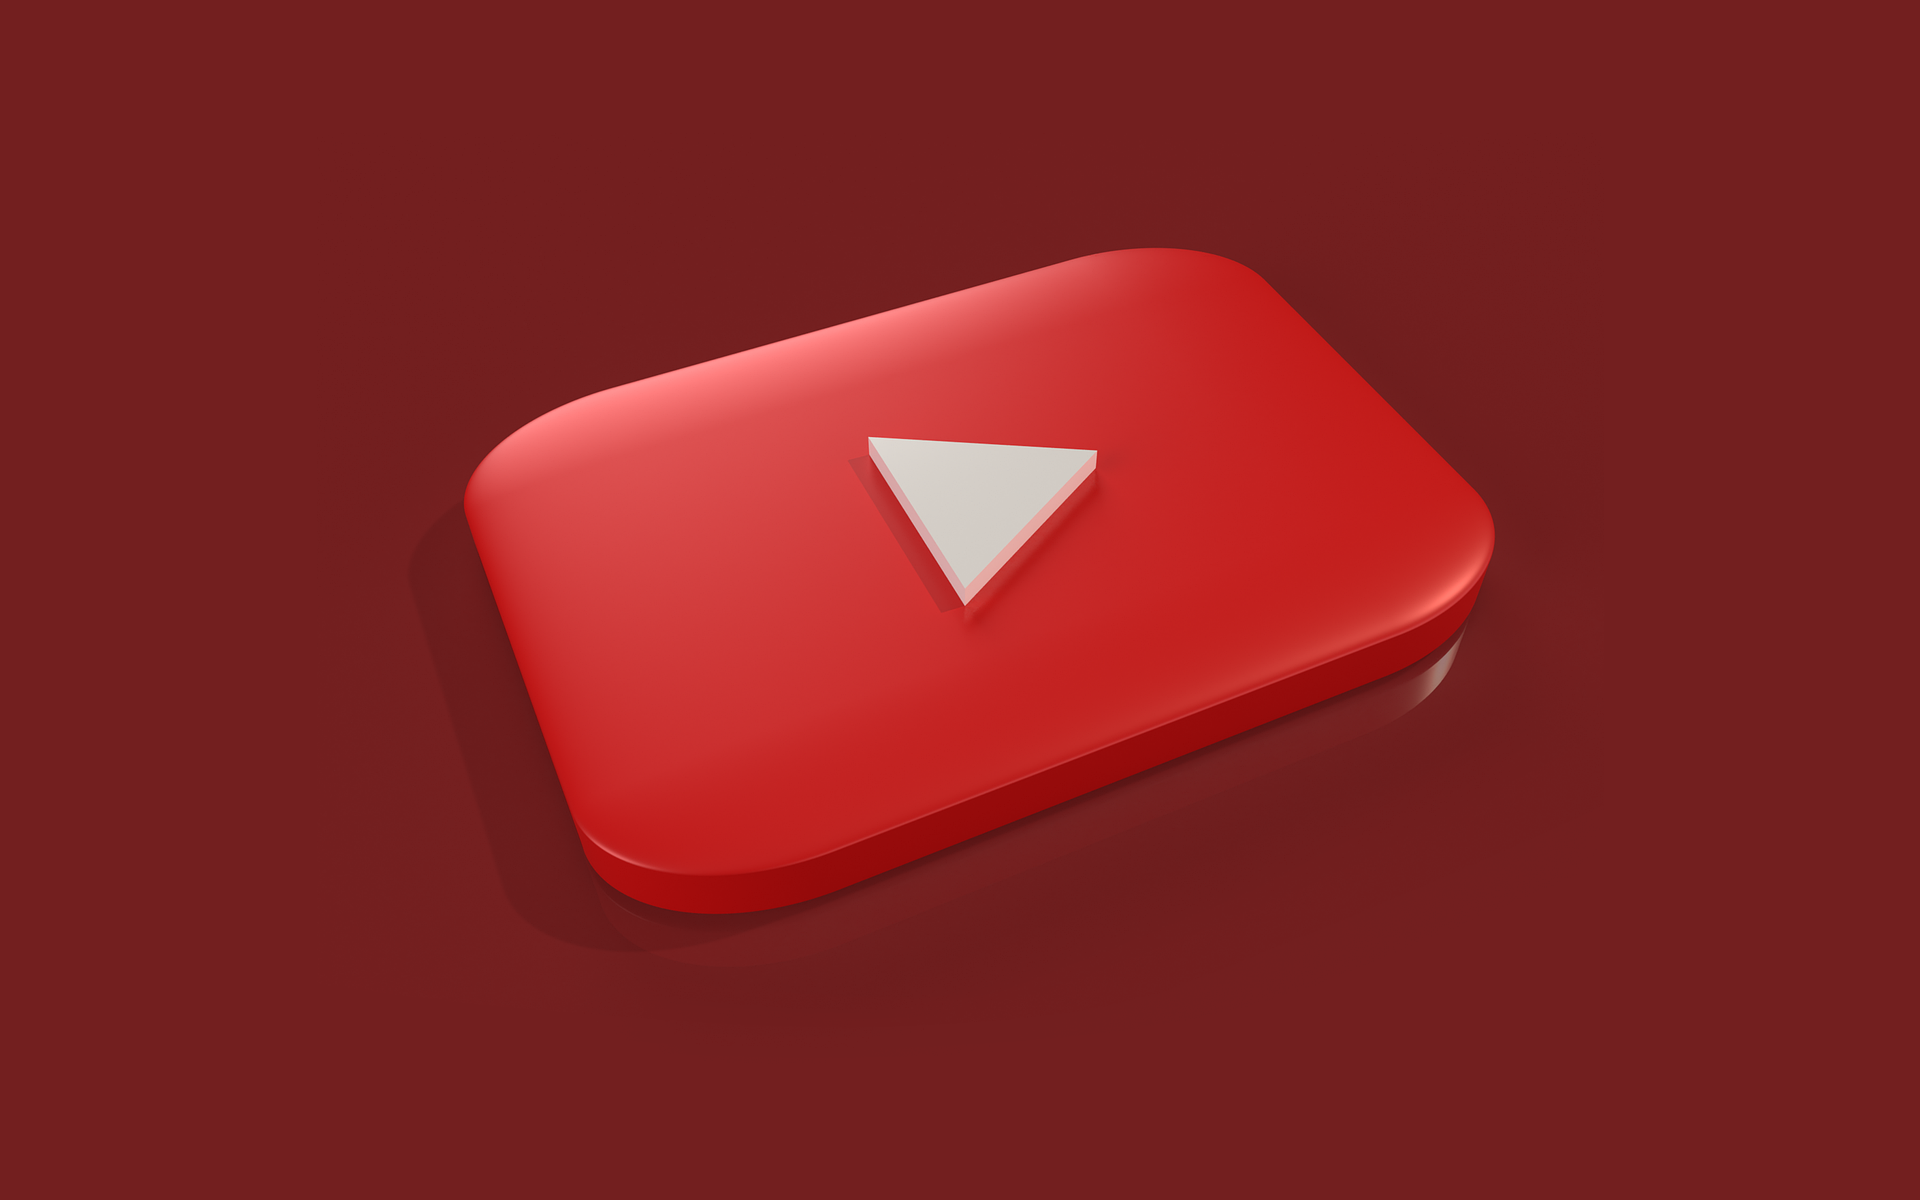 YouTube Play button on a red surface